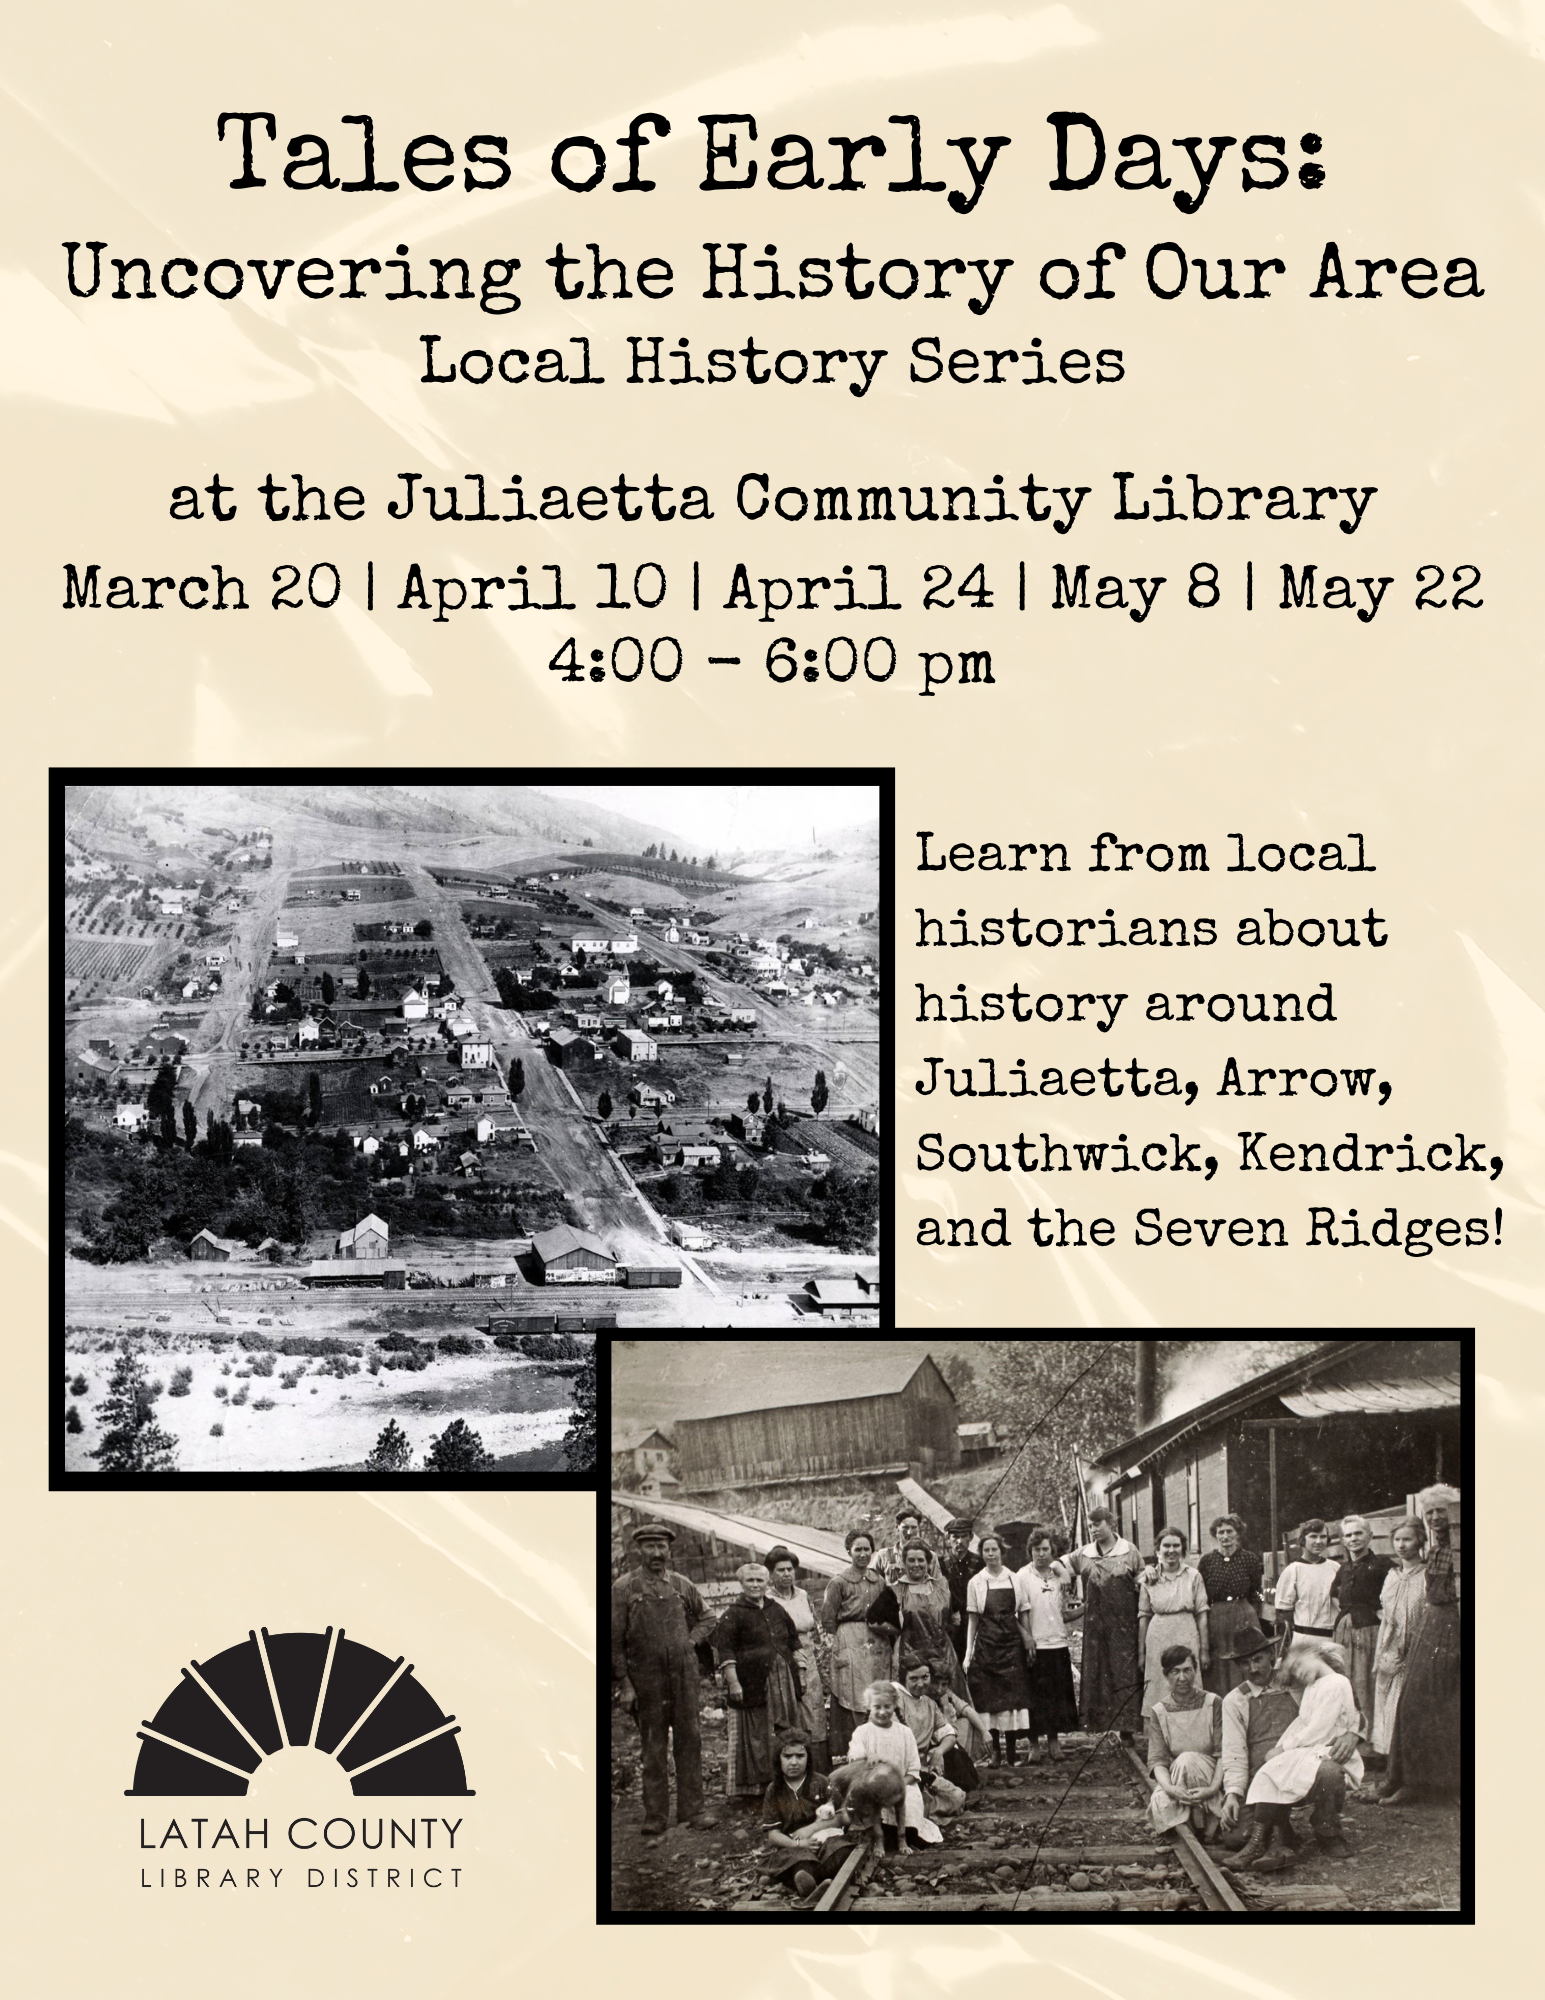 Tales of Early Days: Uncovering the History of Our Area